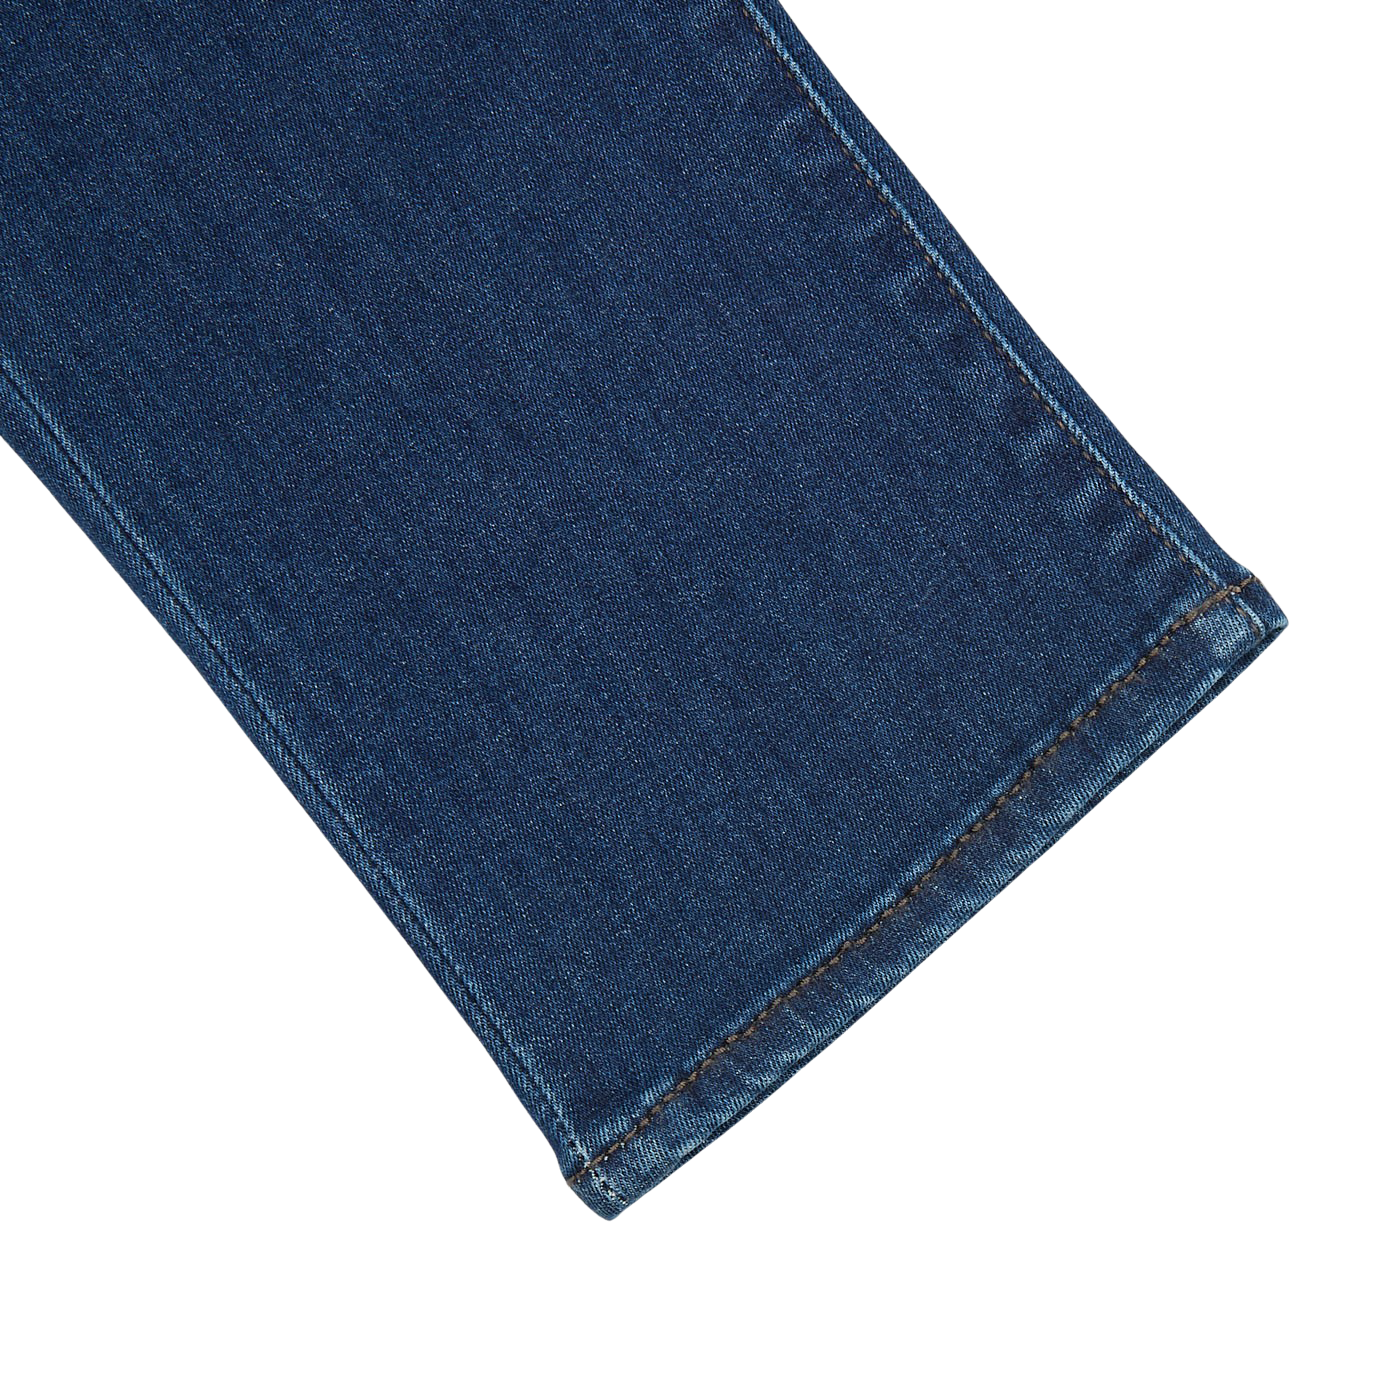 A close up of a pair of Tramarossa Blue Leonardo Zip 6 Months Heritage Jeans.